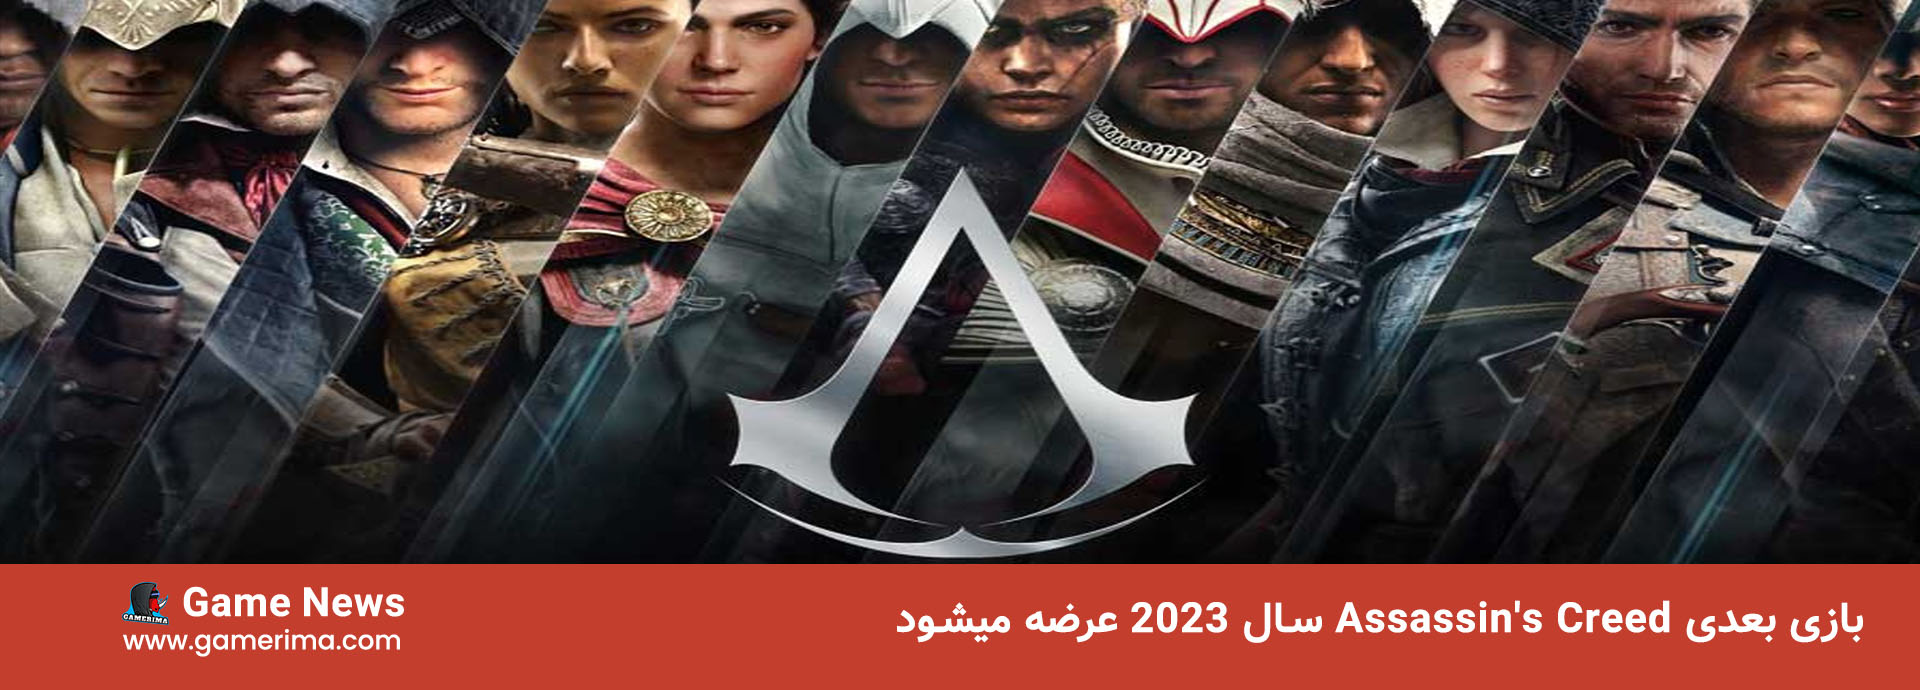 Assassin's Creed new Game rumors